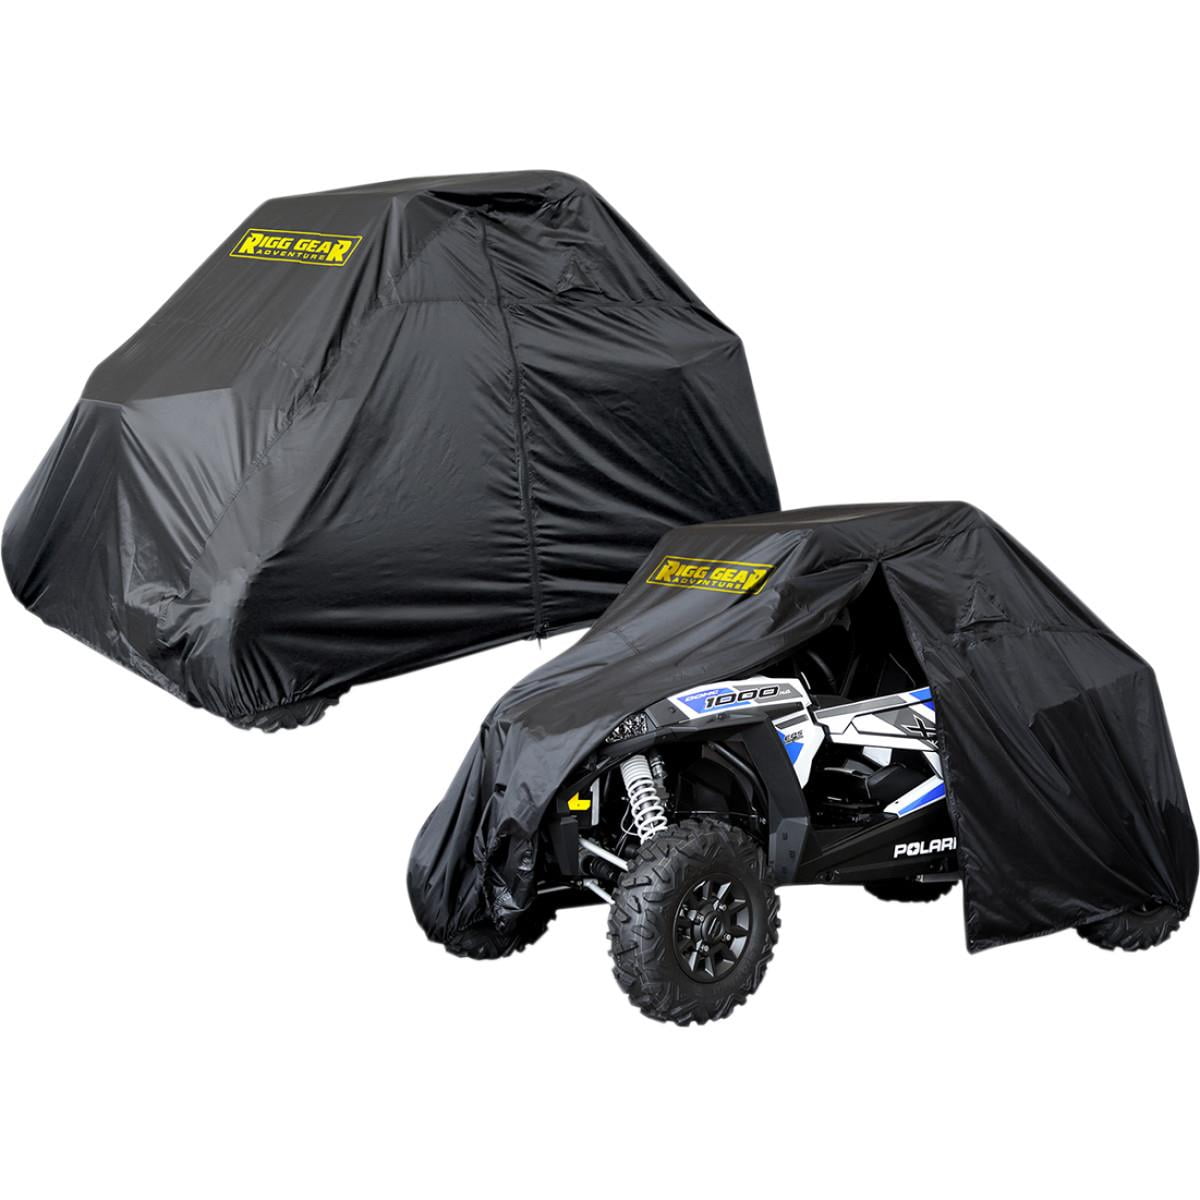 2015 Nelson-Rigg Deluxe All Season Motorcycle Sport Bike Street Cover